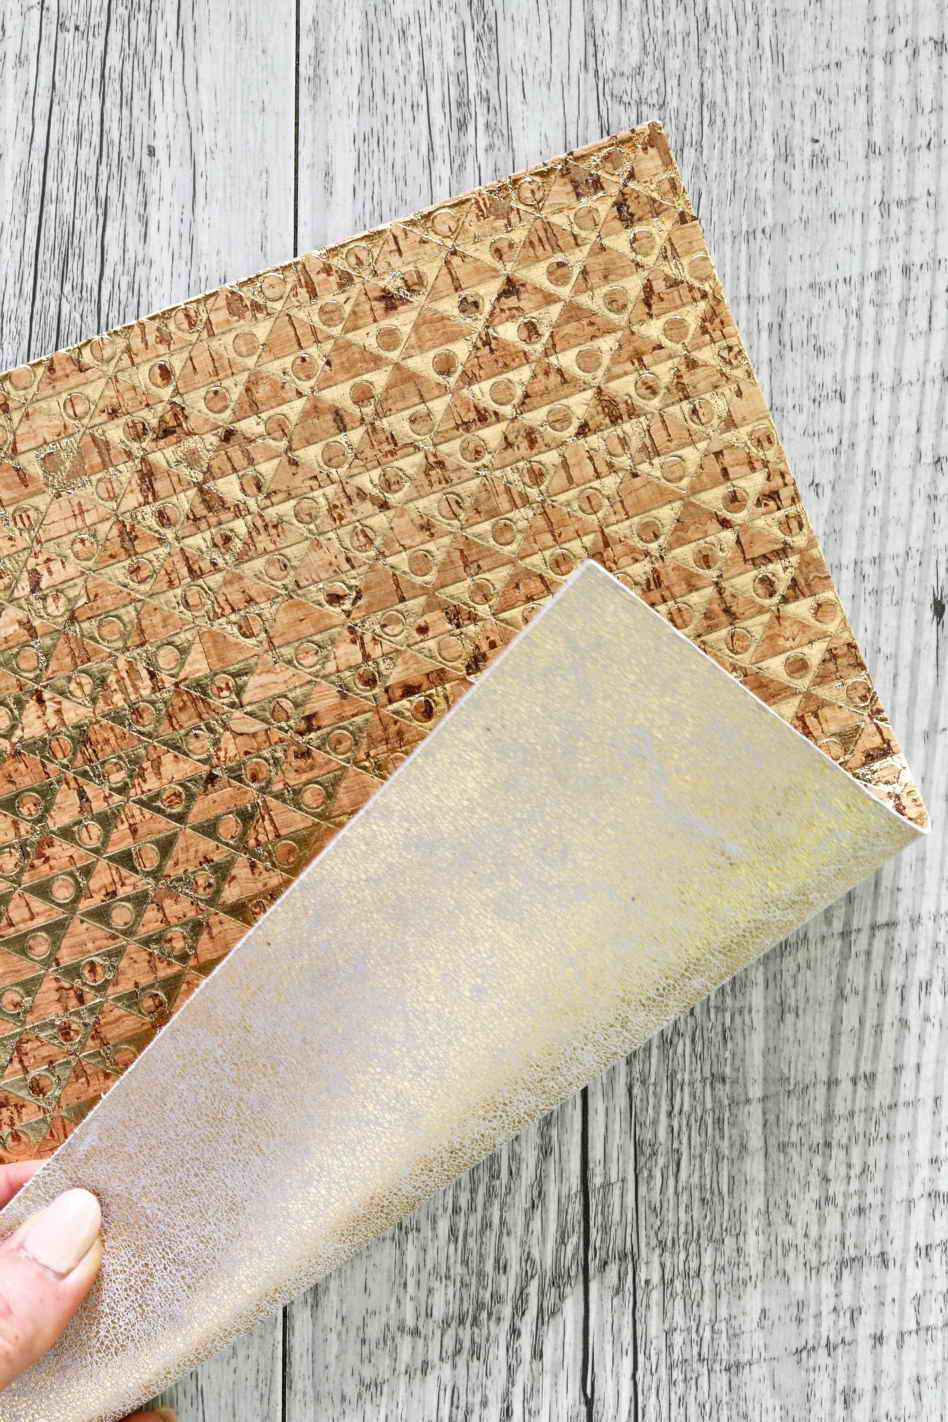 Leather backed cork sheets - gold geometric print - cork applied to gold  and white cowhide leather 6x4